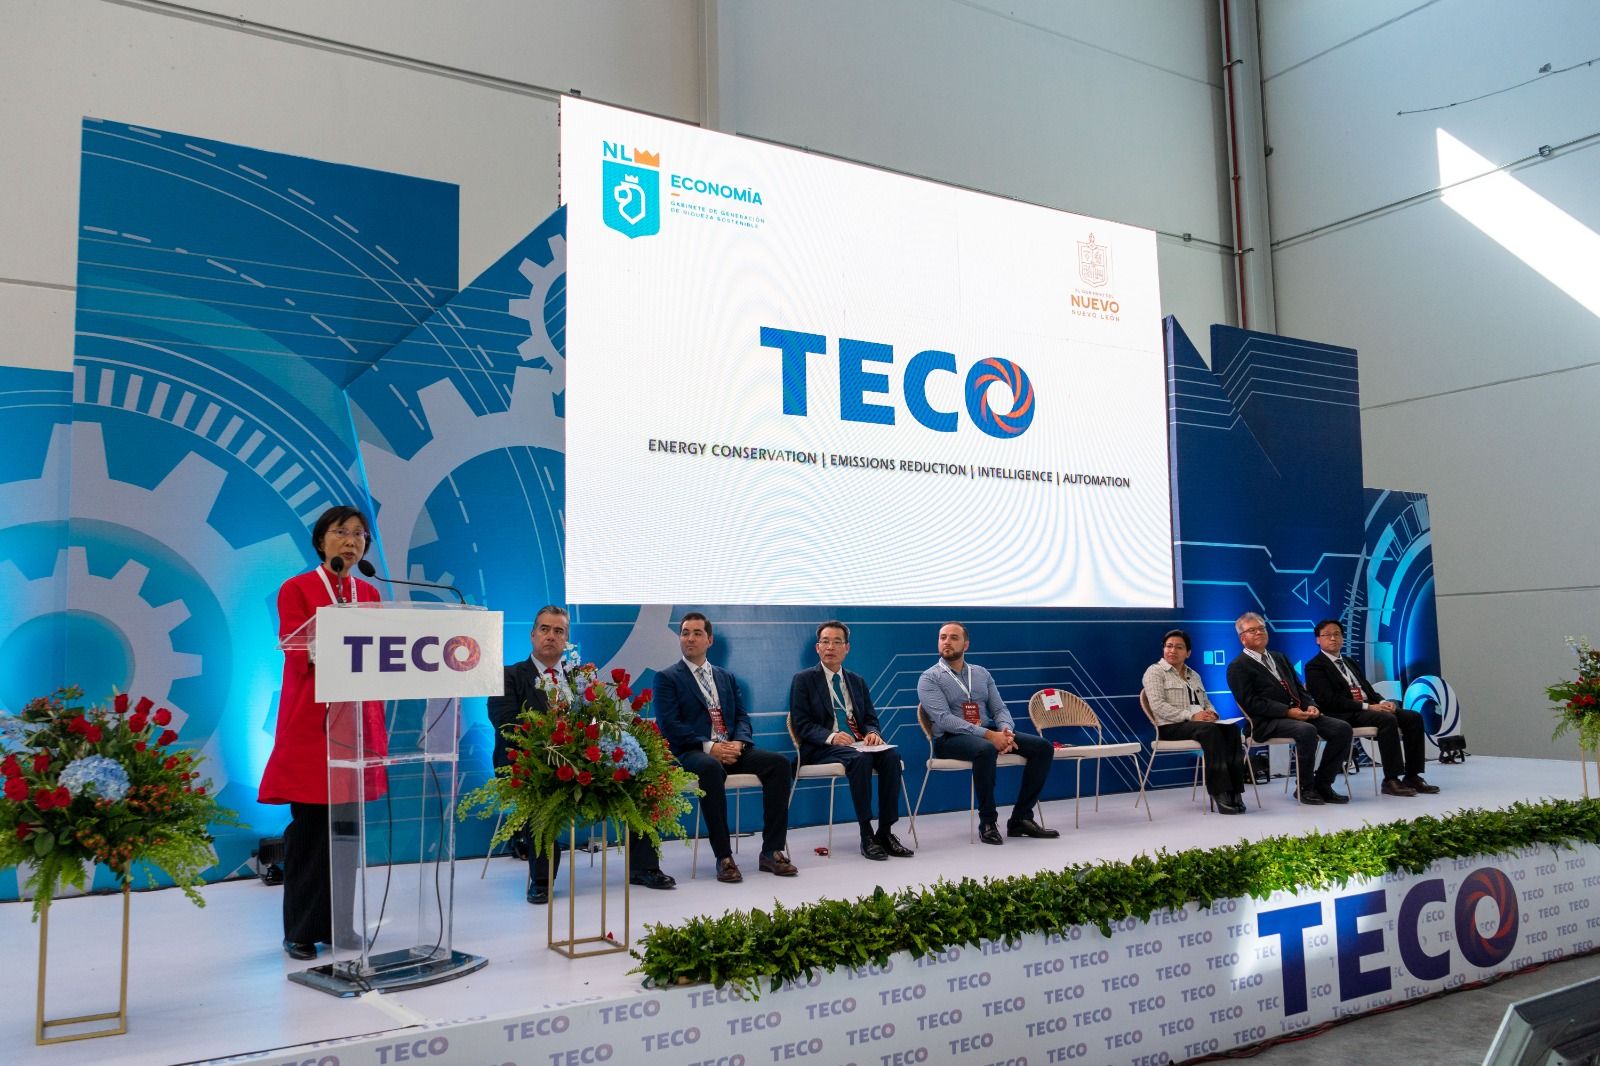 Teco Electric & Machinery to invest US$10 million in Nuevo León